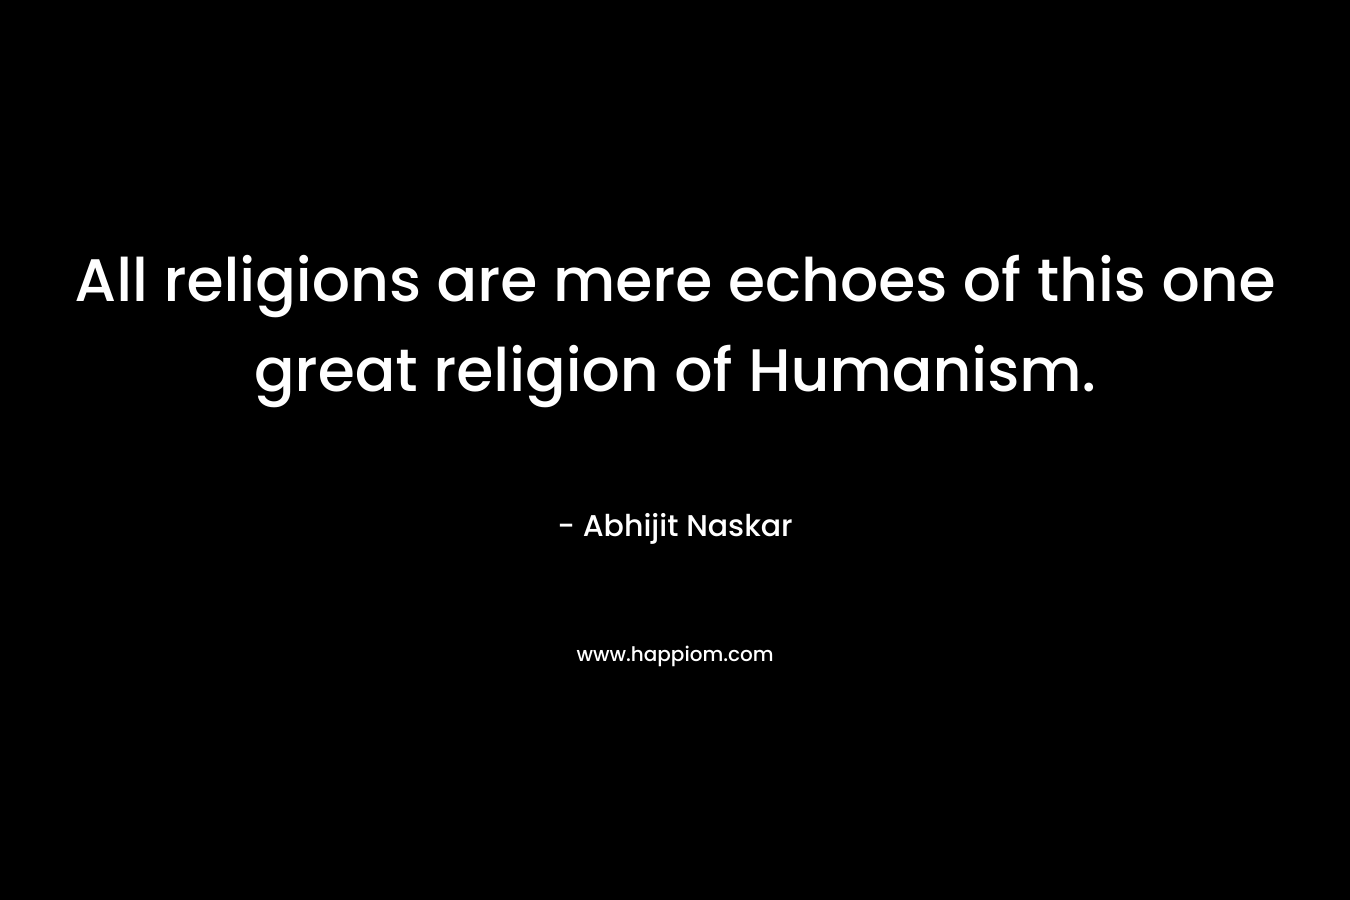 All religions are mere echoes of this one great religion of Humanism.